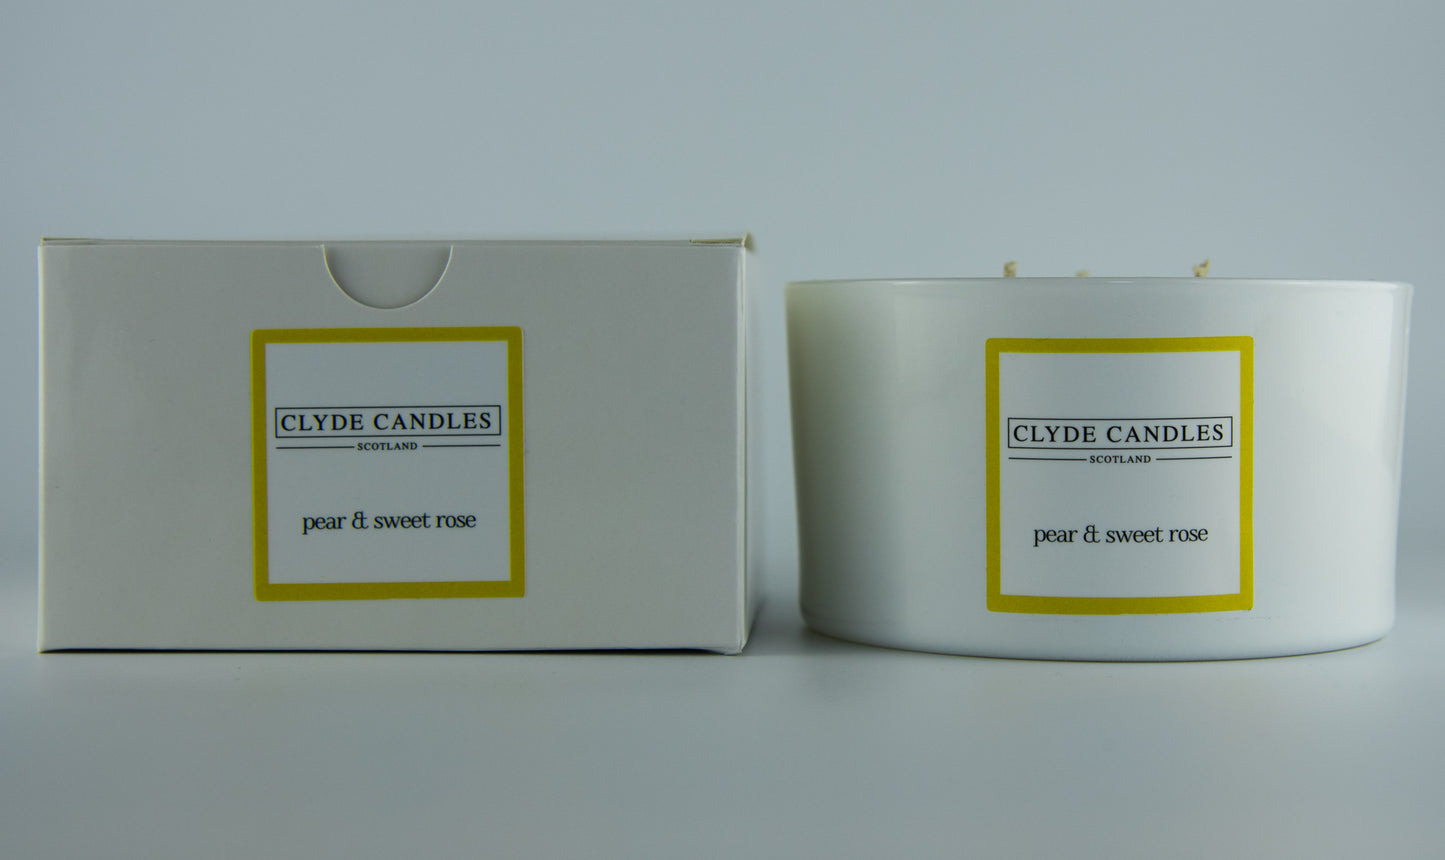 Clyde candles pear and sweet rose , three wicks large glass gift box hand made soy candle made in scotland